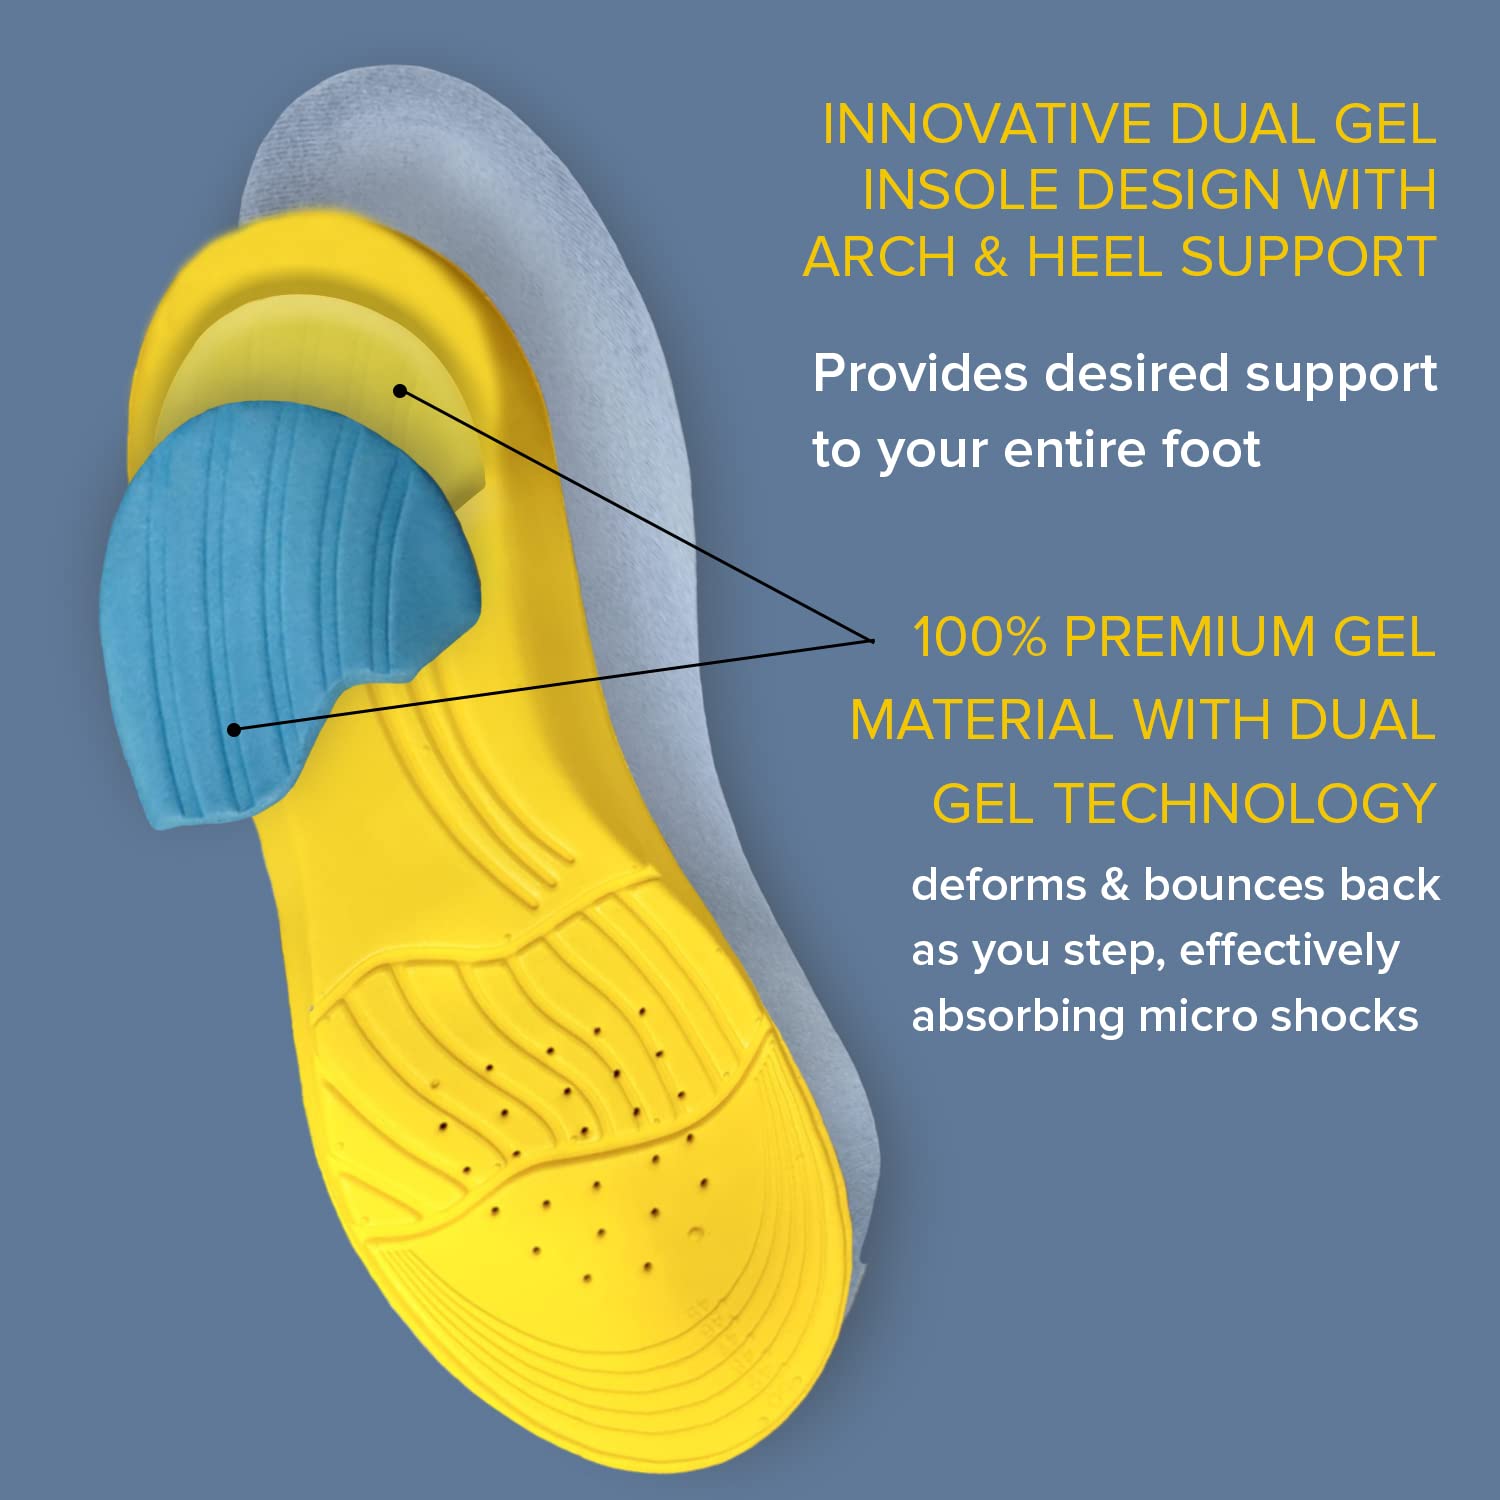 SWOPPLY 2 Pcs silicone gel insole,Orthotic Arch Support Shoe Pad Sport  Running, Insoles shoe Foot Care Plantar Fasciitis,Heel Pain Treatment Anti  Fatigue for Walking, Runing and Sports : Amazon.in: Shoes & Handbags